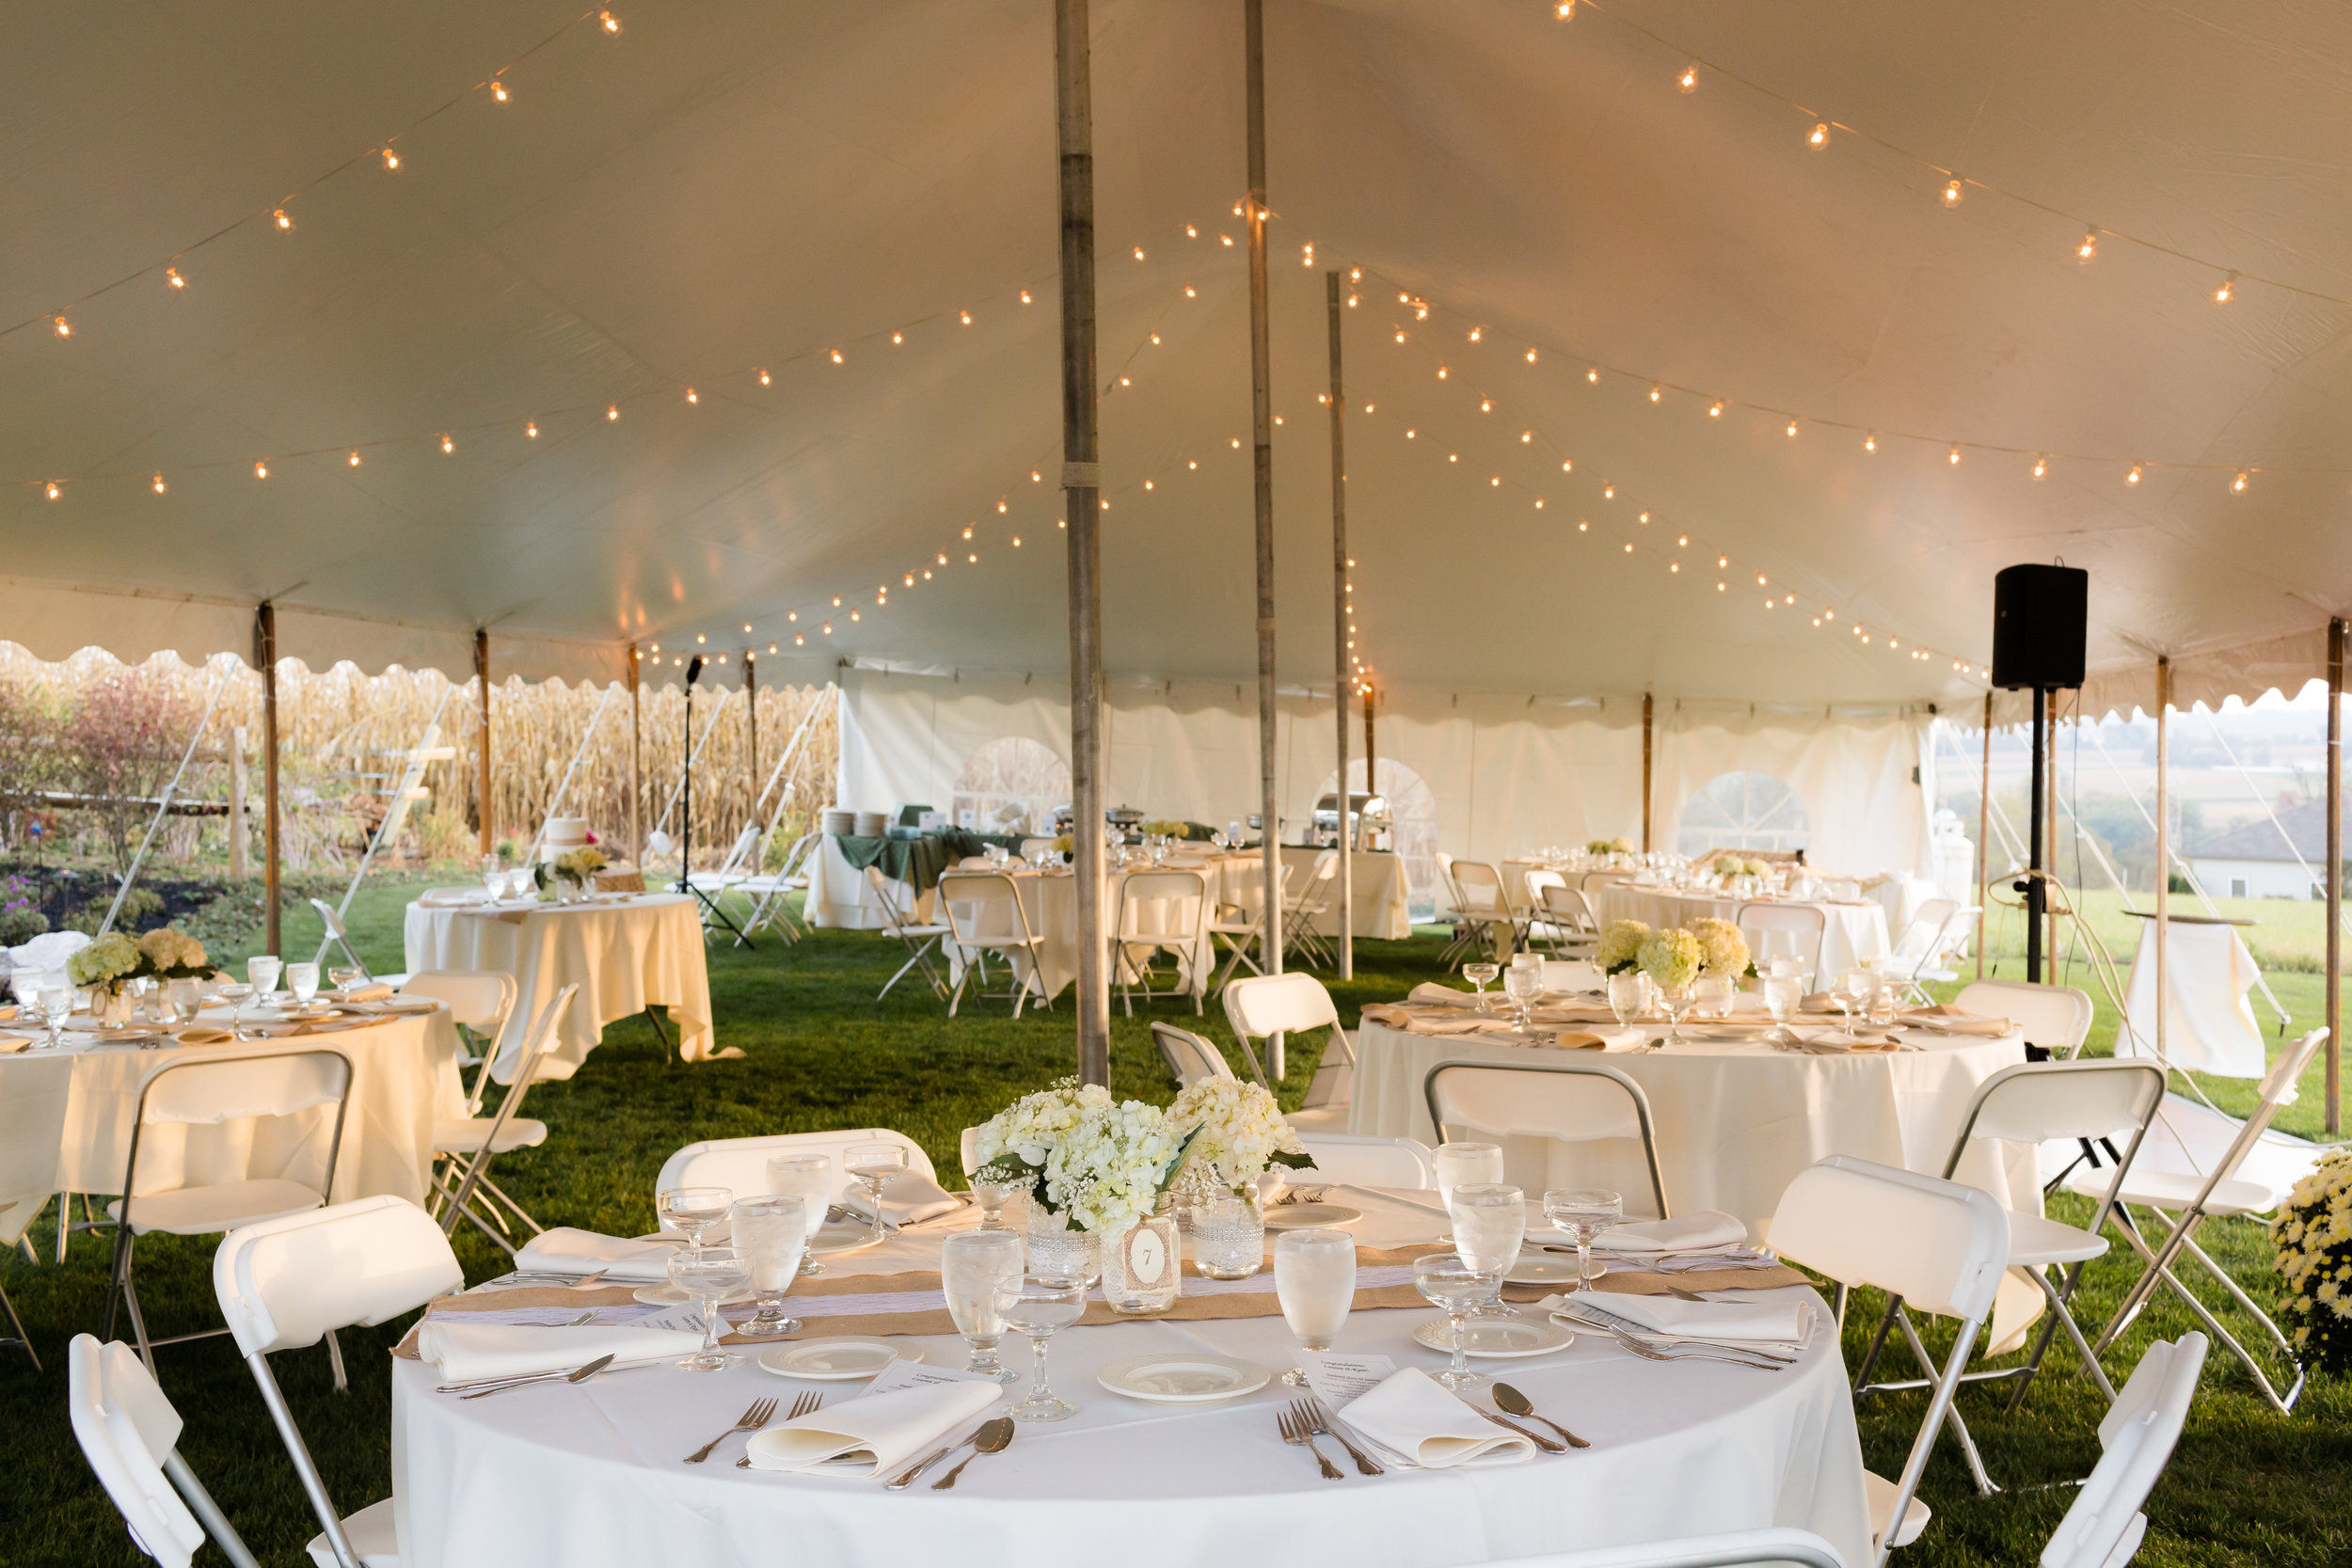 Tent Rentals In Cherry Hill Nj Tents For Rent